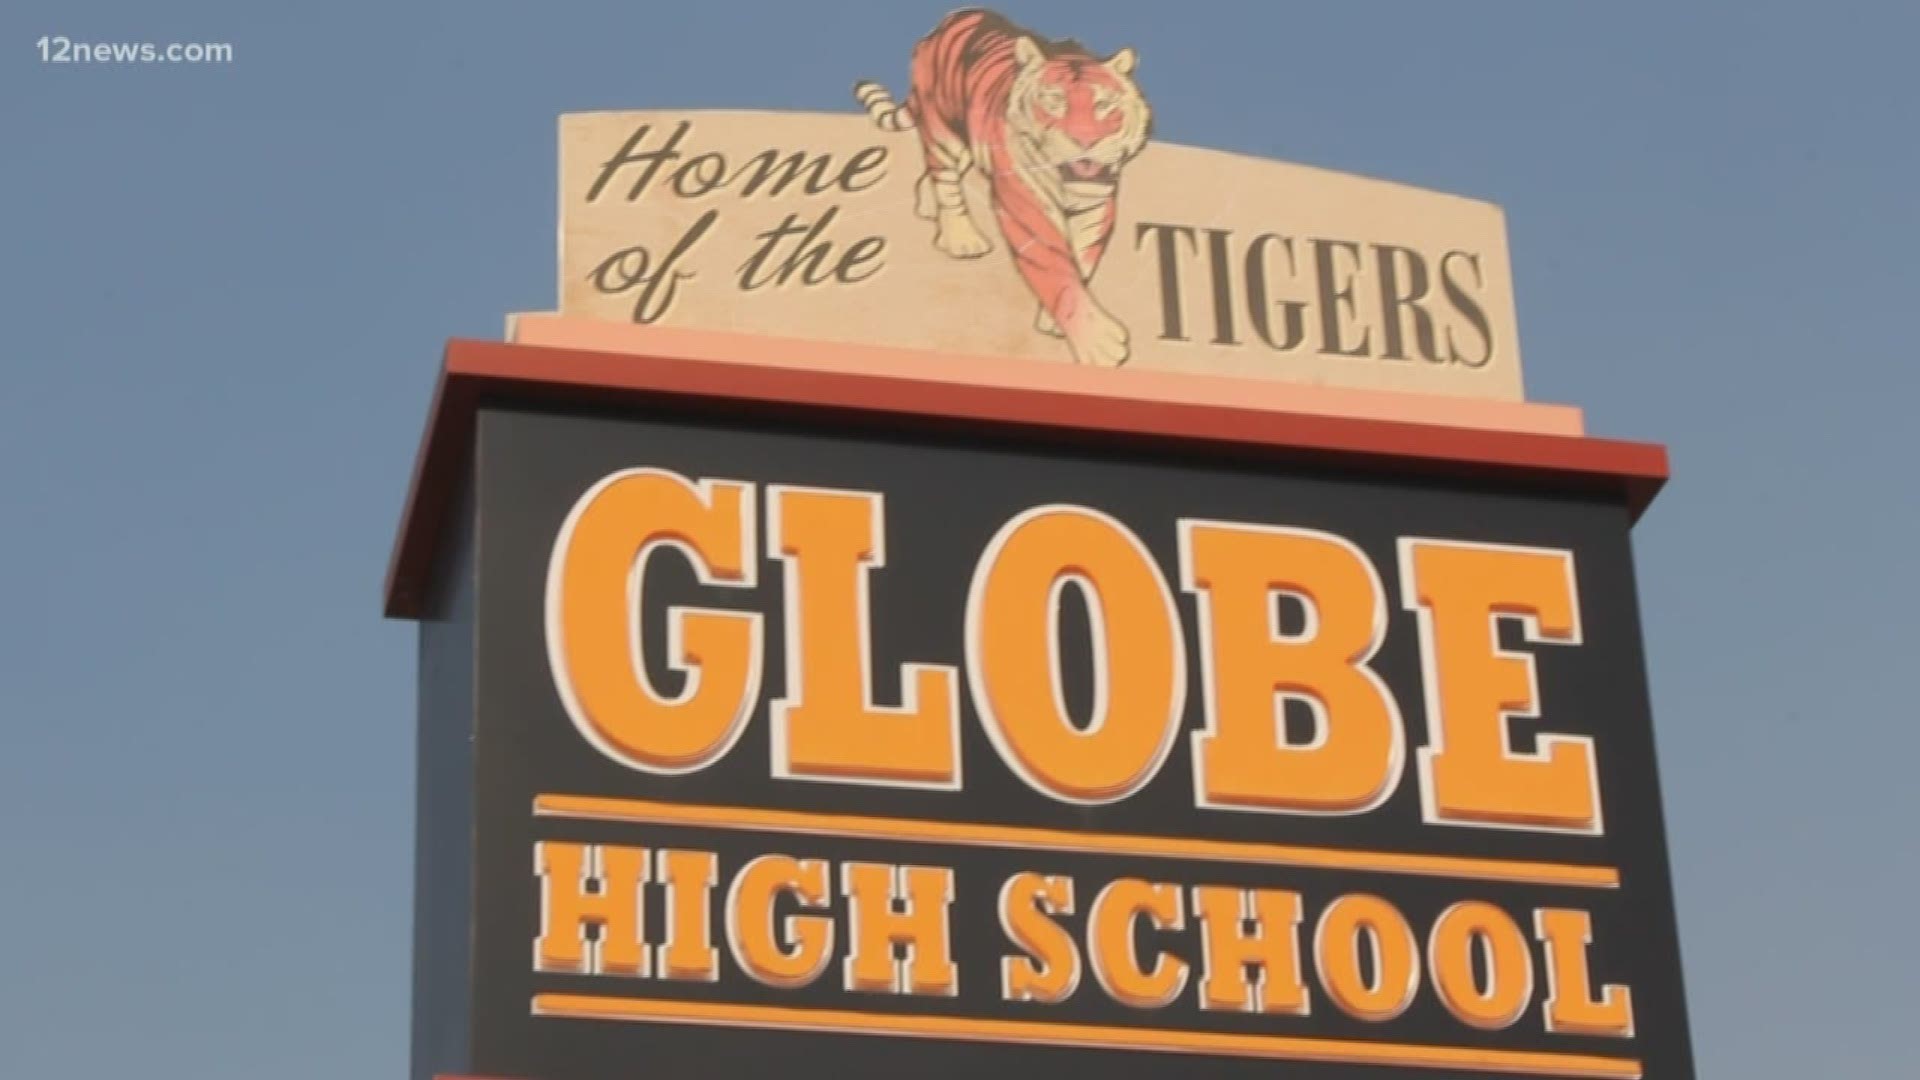 High school football season isn't that far away, and the Globe Tigers are putting in the work now to have a, hopefully, big payoff down the line. Their first-year coach is helping the team fight through the heat, pain, sweat and tears to get ready.